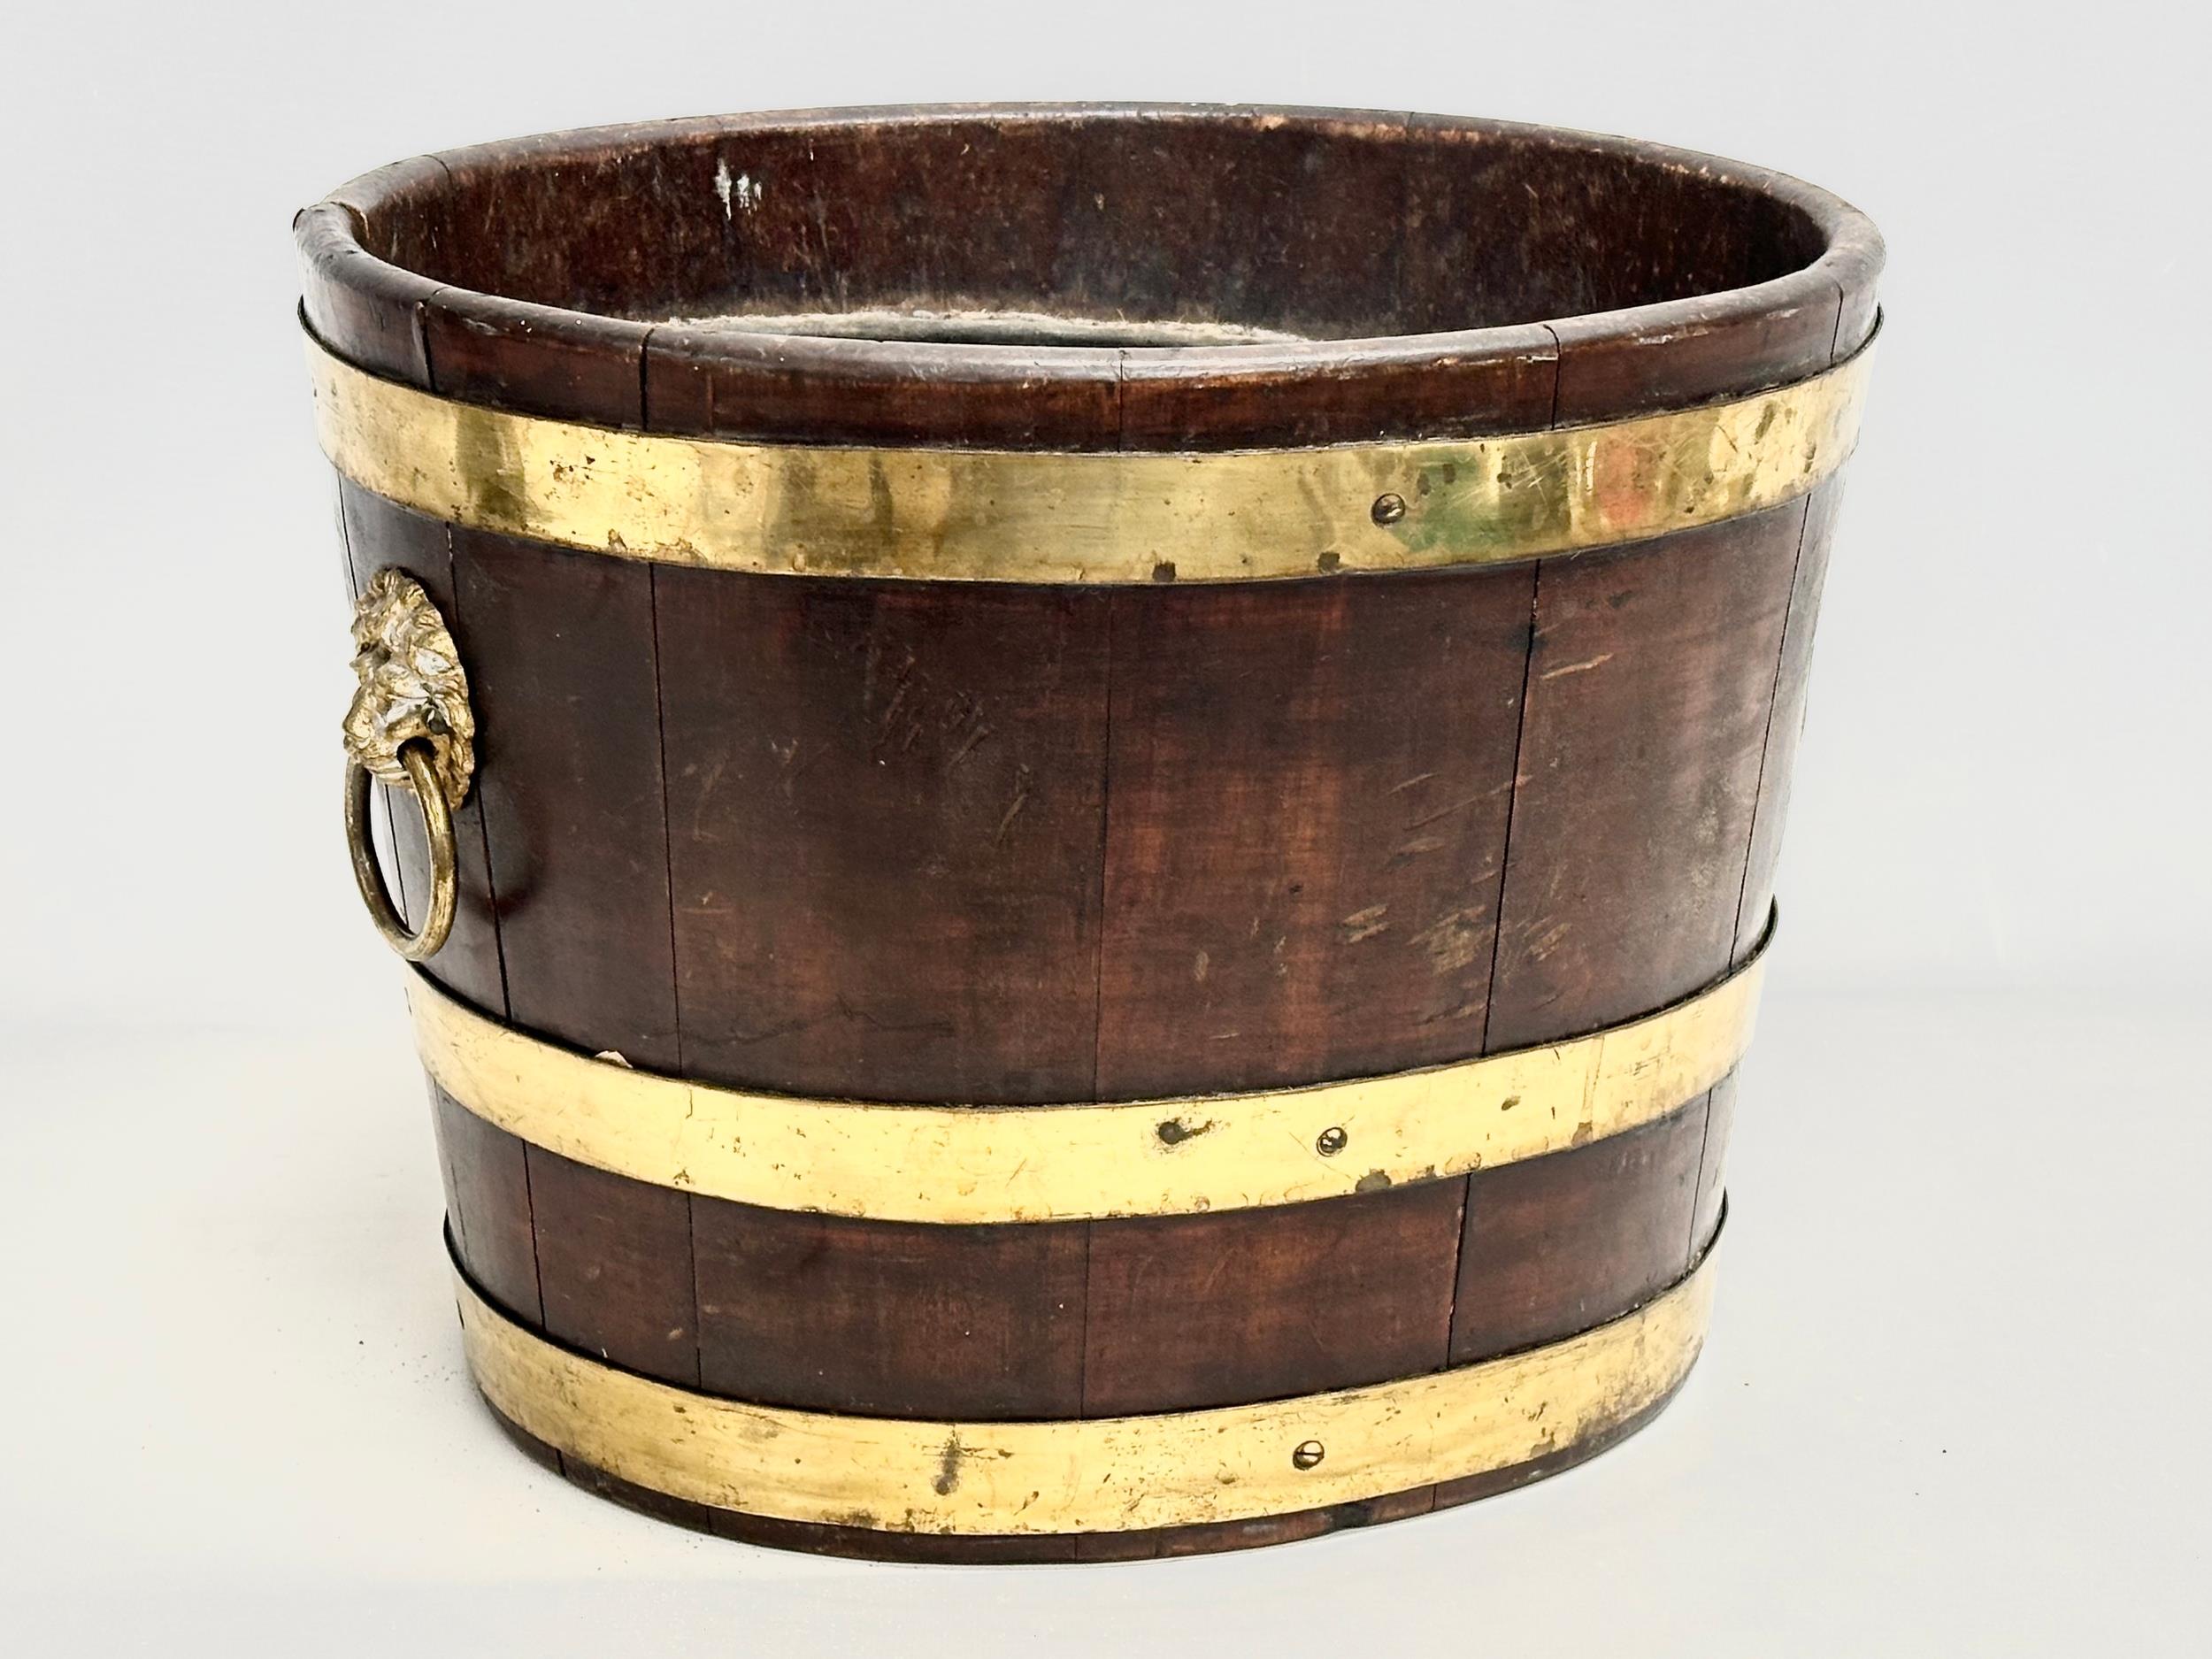 A George III brass bound wine cooler with lion ring handles and original liner. Circa 1780-1790.